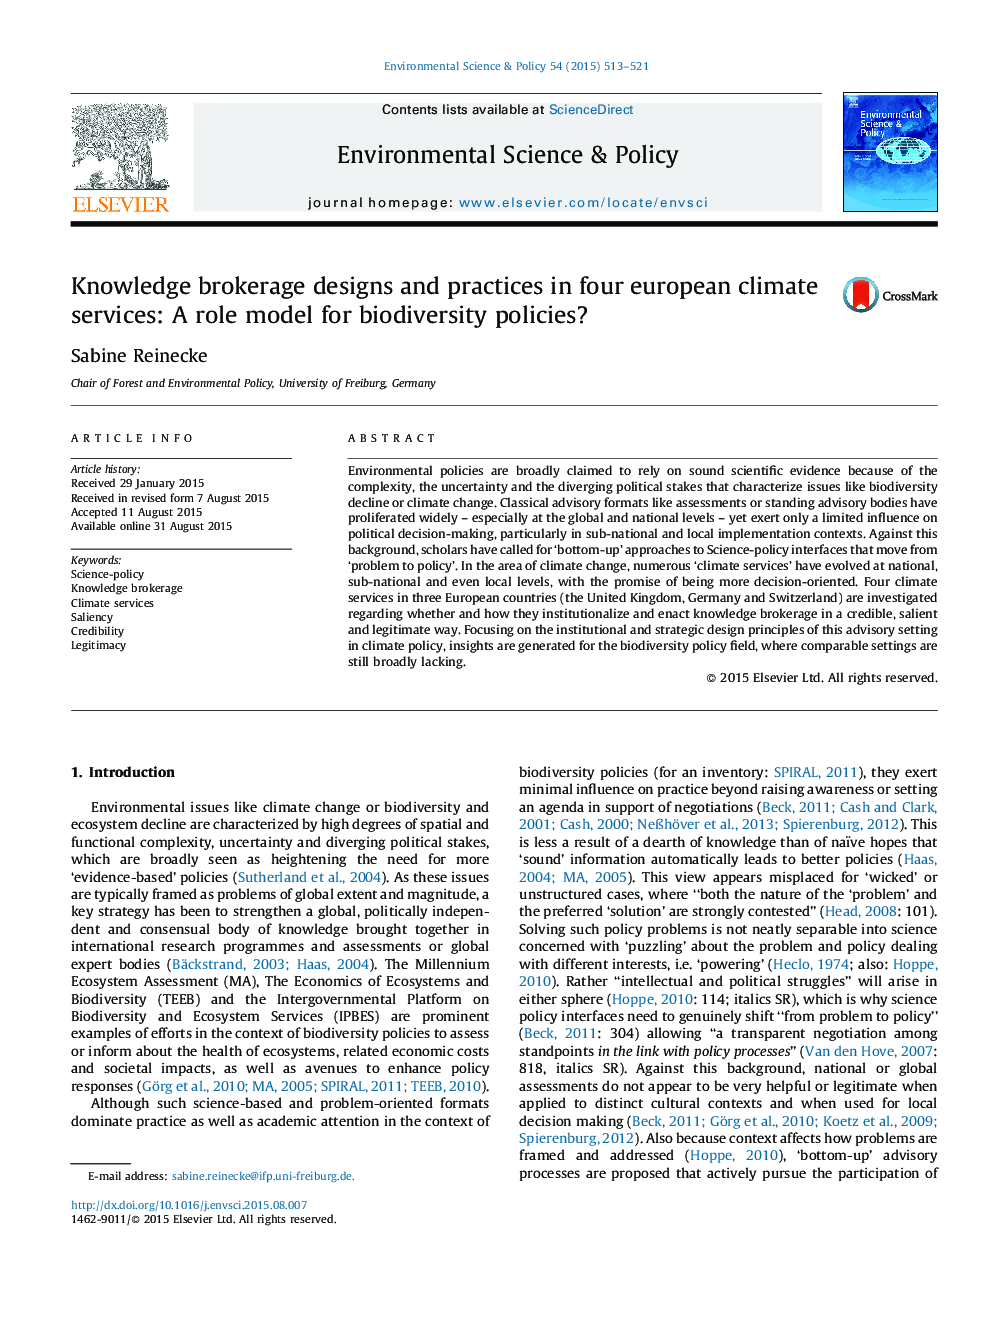 Knowledge brokerage designs and practices in four european climate services: A role model for biodiversity policies?